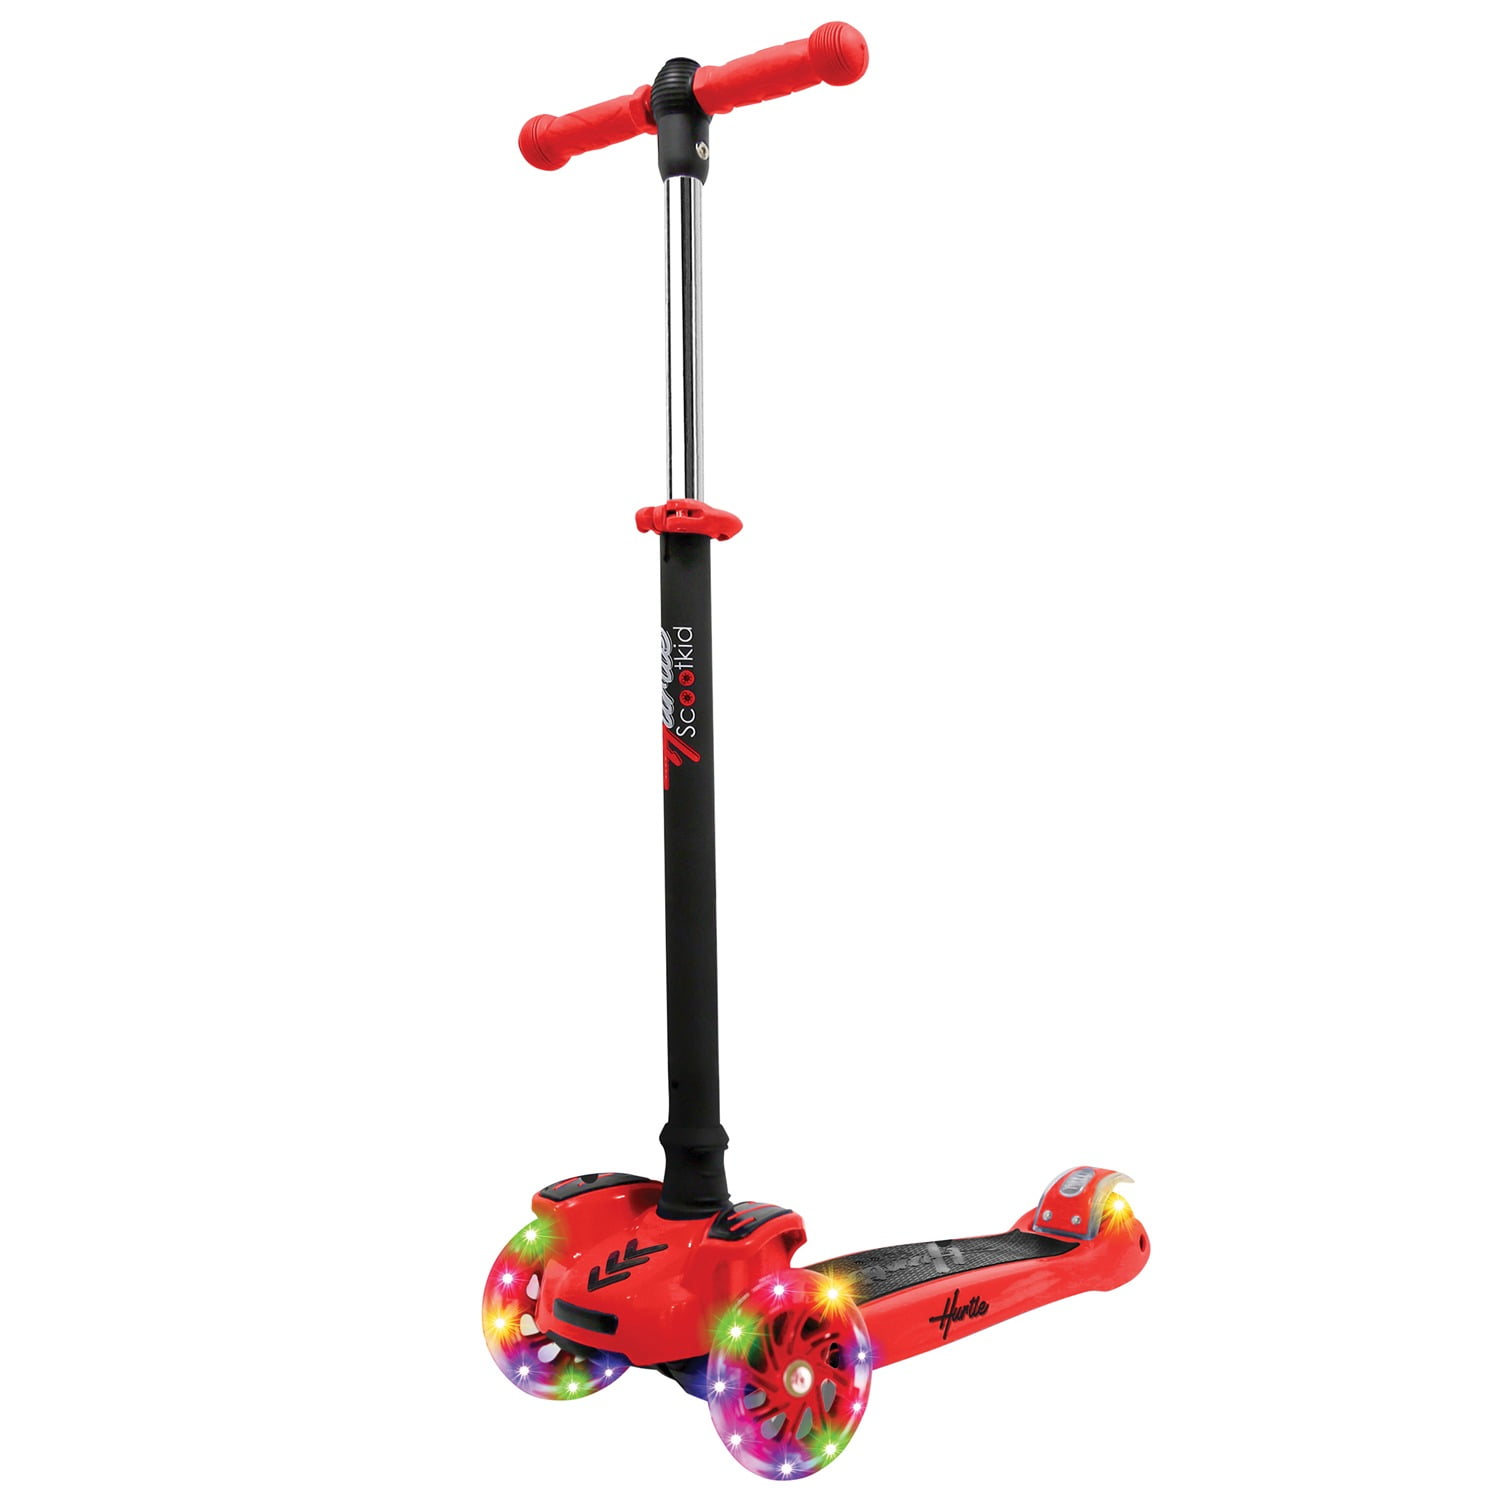 Details about   2-in-1 LED Flashing Kick Scooter For Kids Toddler Deluxe 3 Wheel w/ Folding E 08 